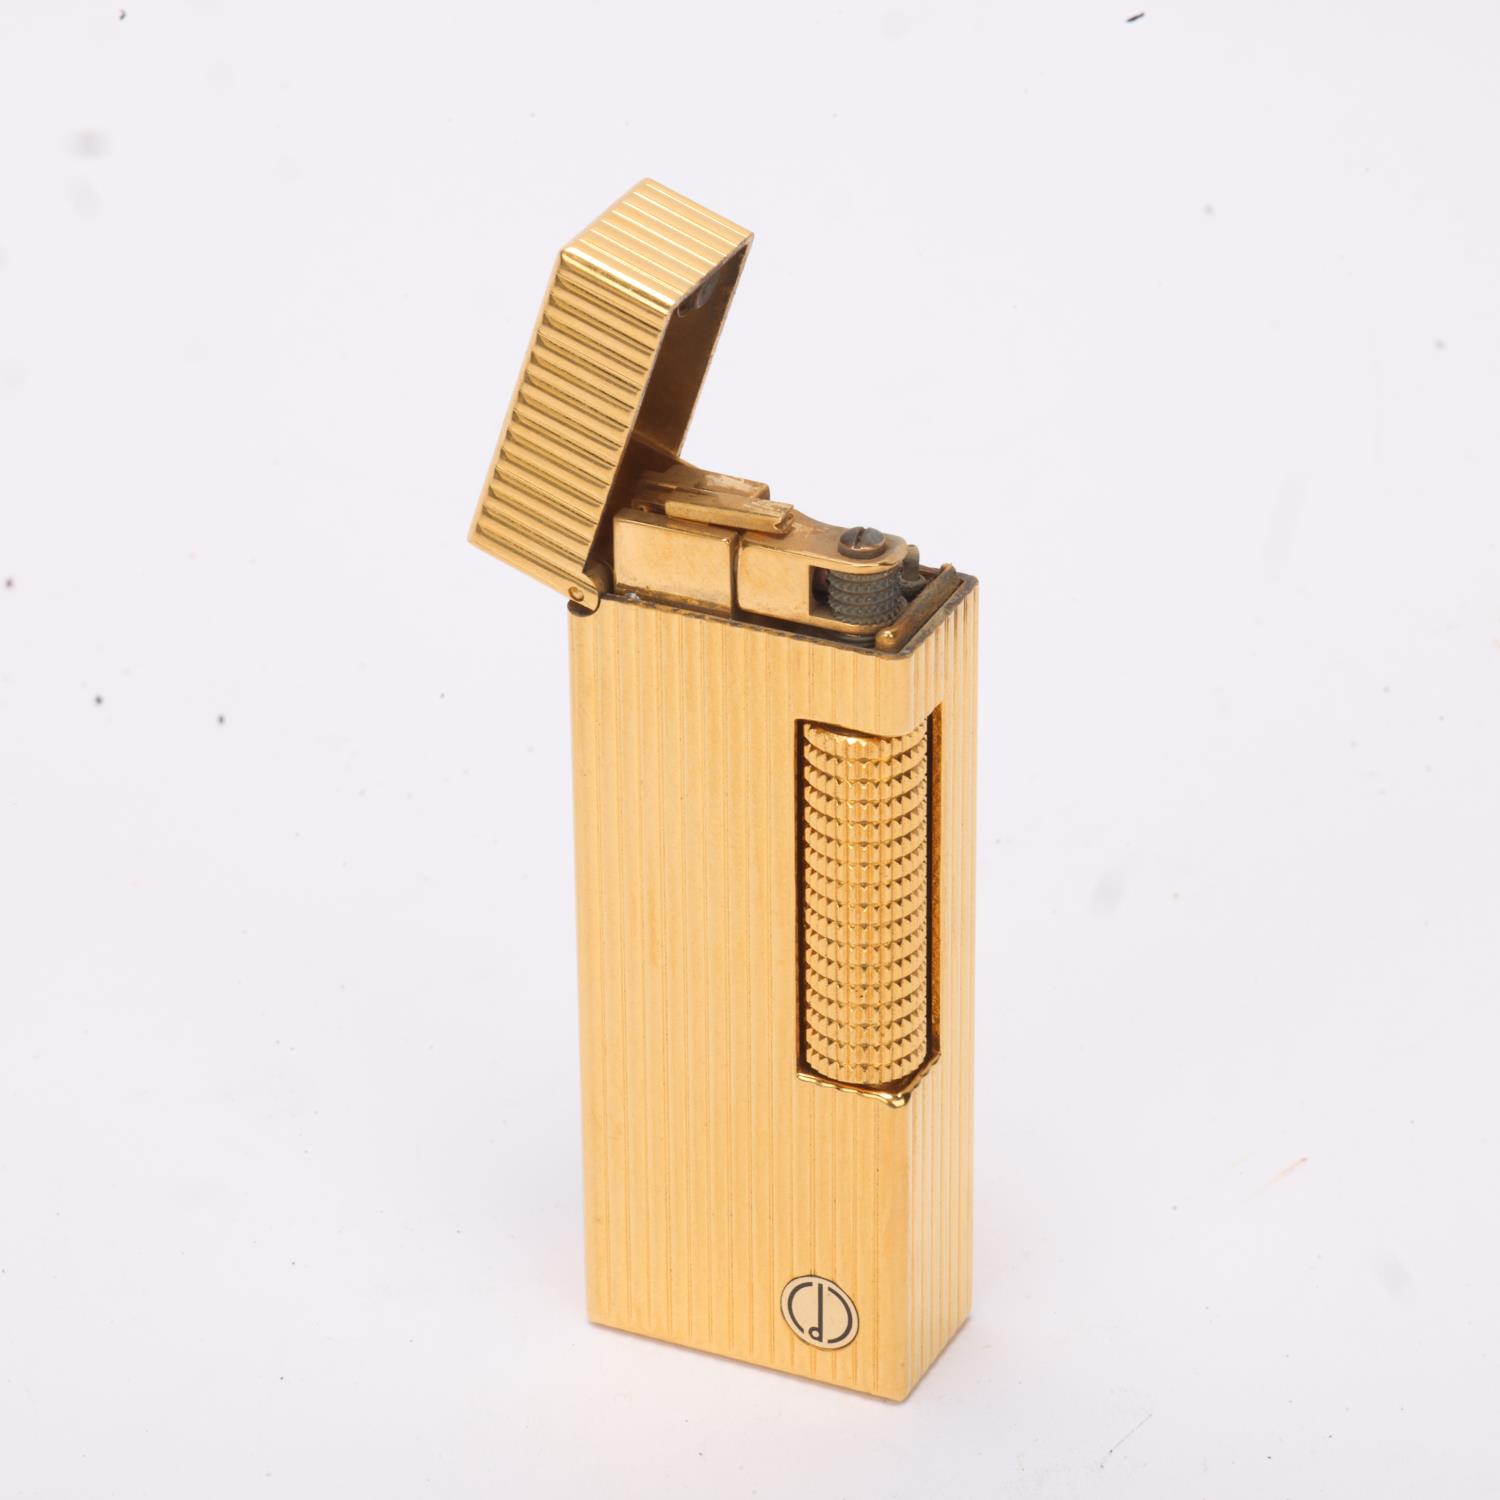 A Dunhill gold plated lighter, serial number 97966, in original box Very good condition - Image 3 of 4